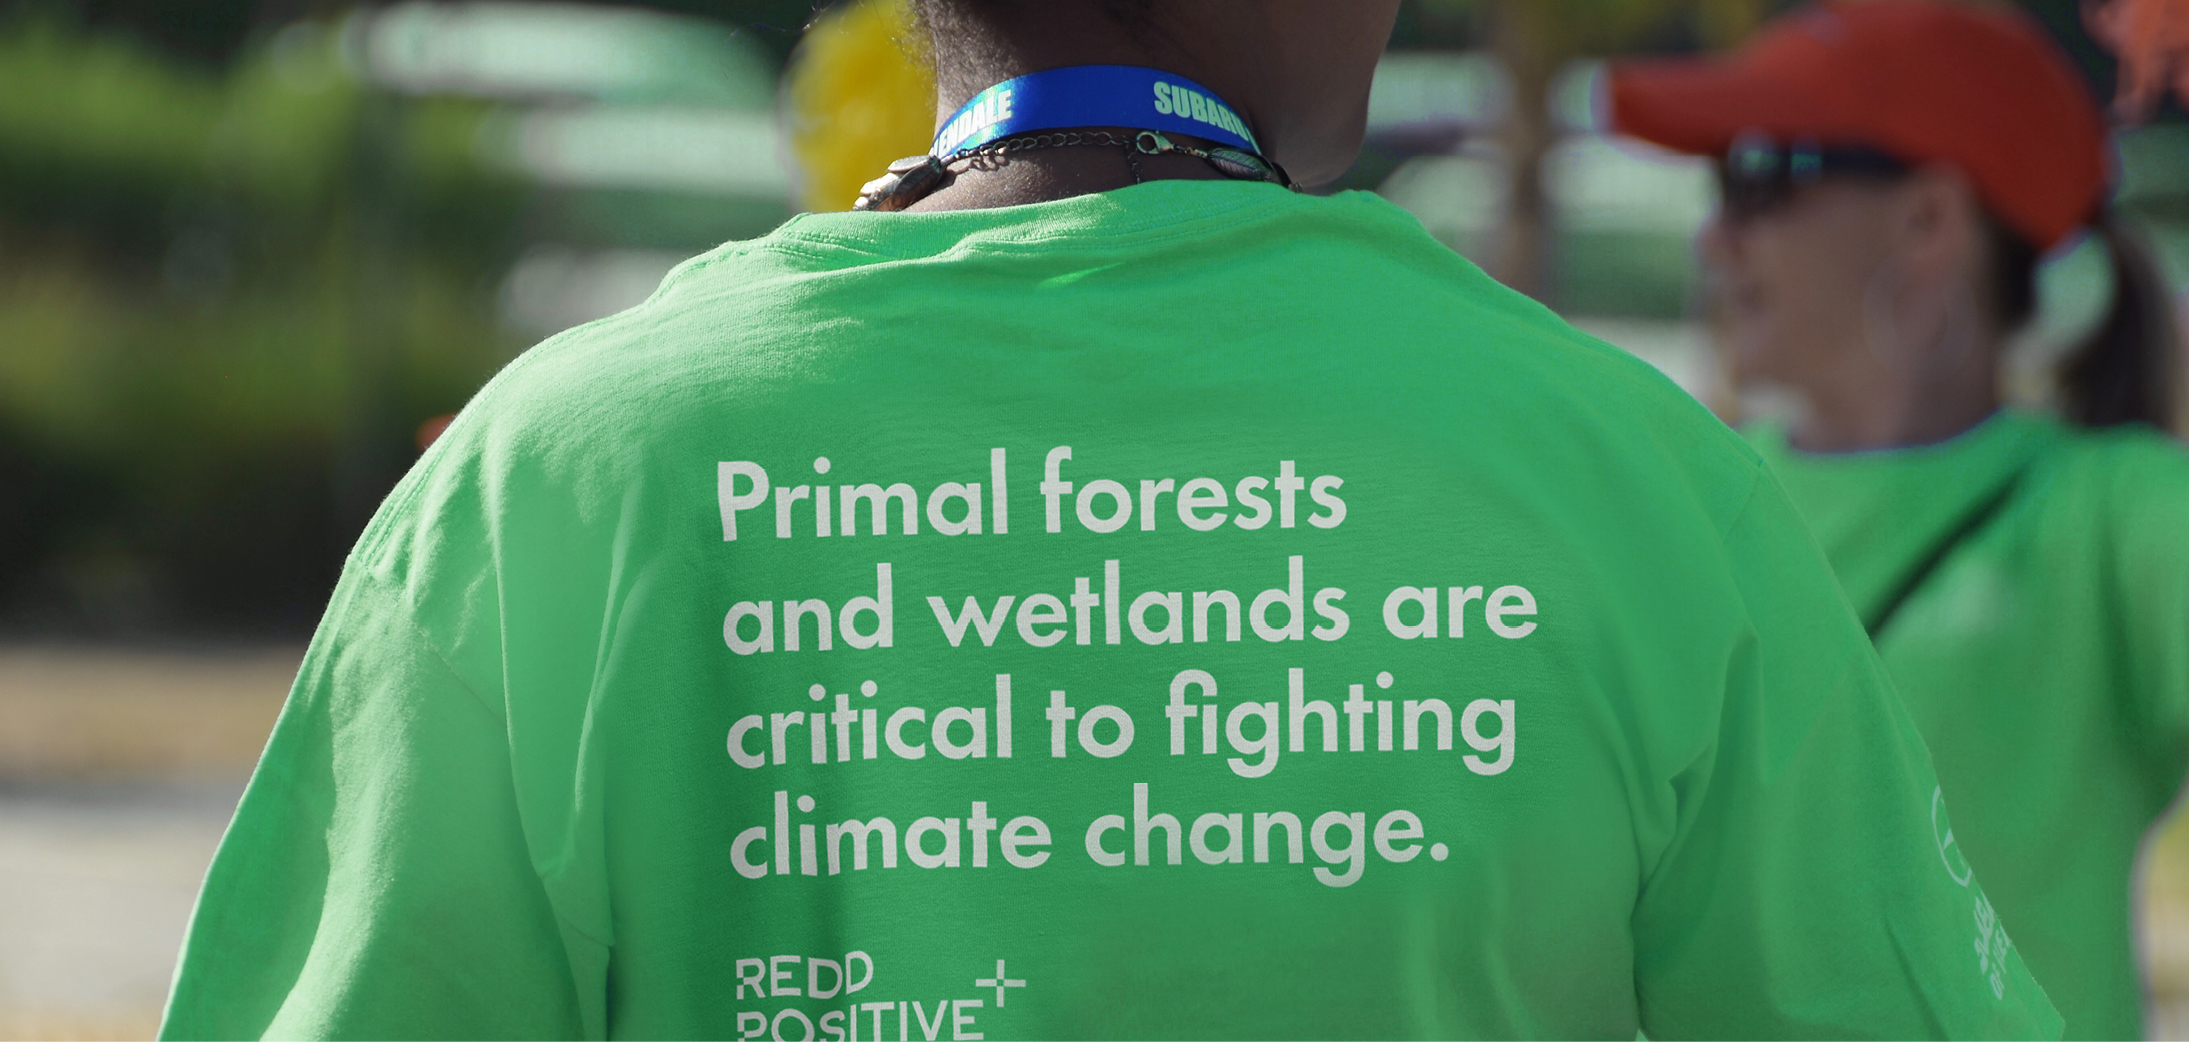 The back of a t-shirt worn by a Wildlife Conservation Society staff person with the text, Primal forests and wetlands are critical to fighting climate change.